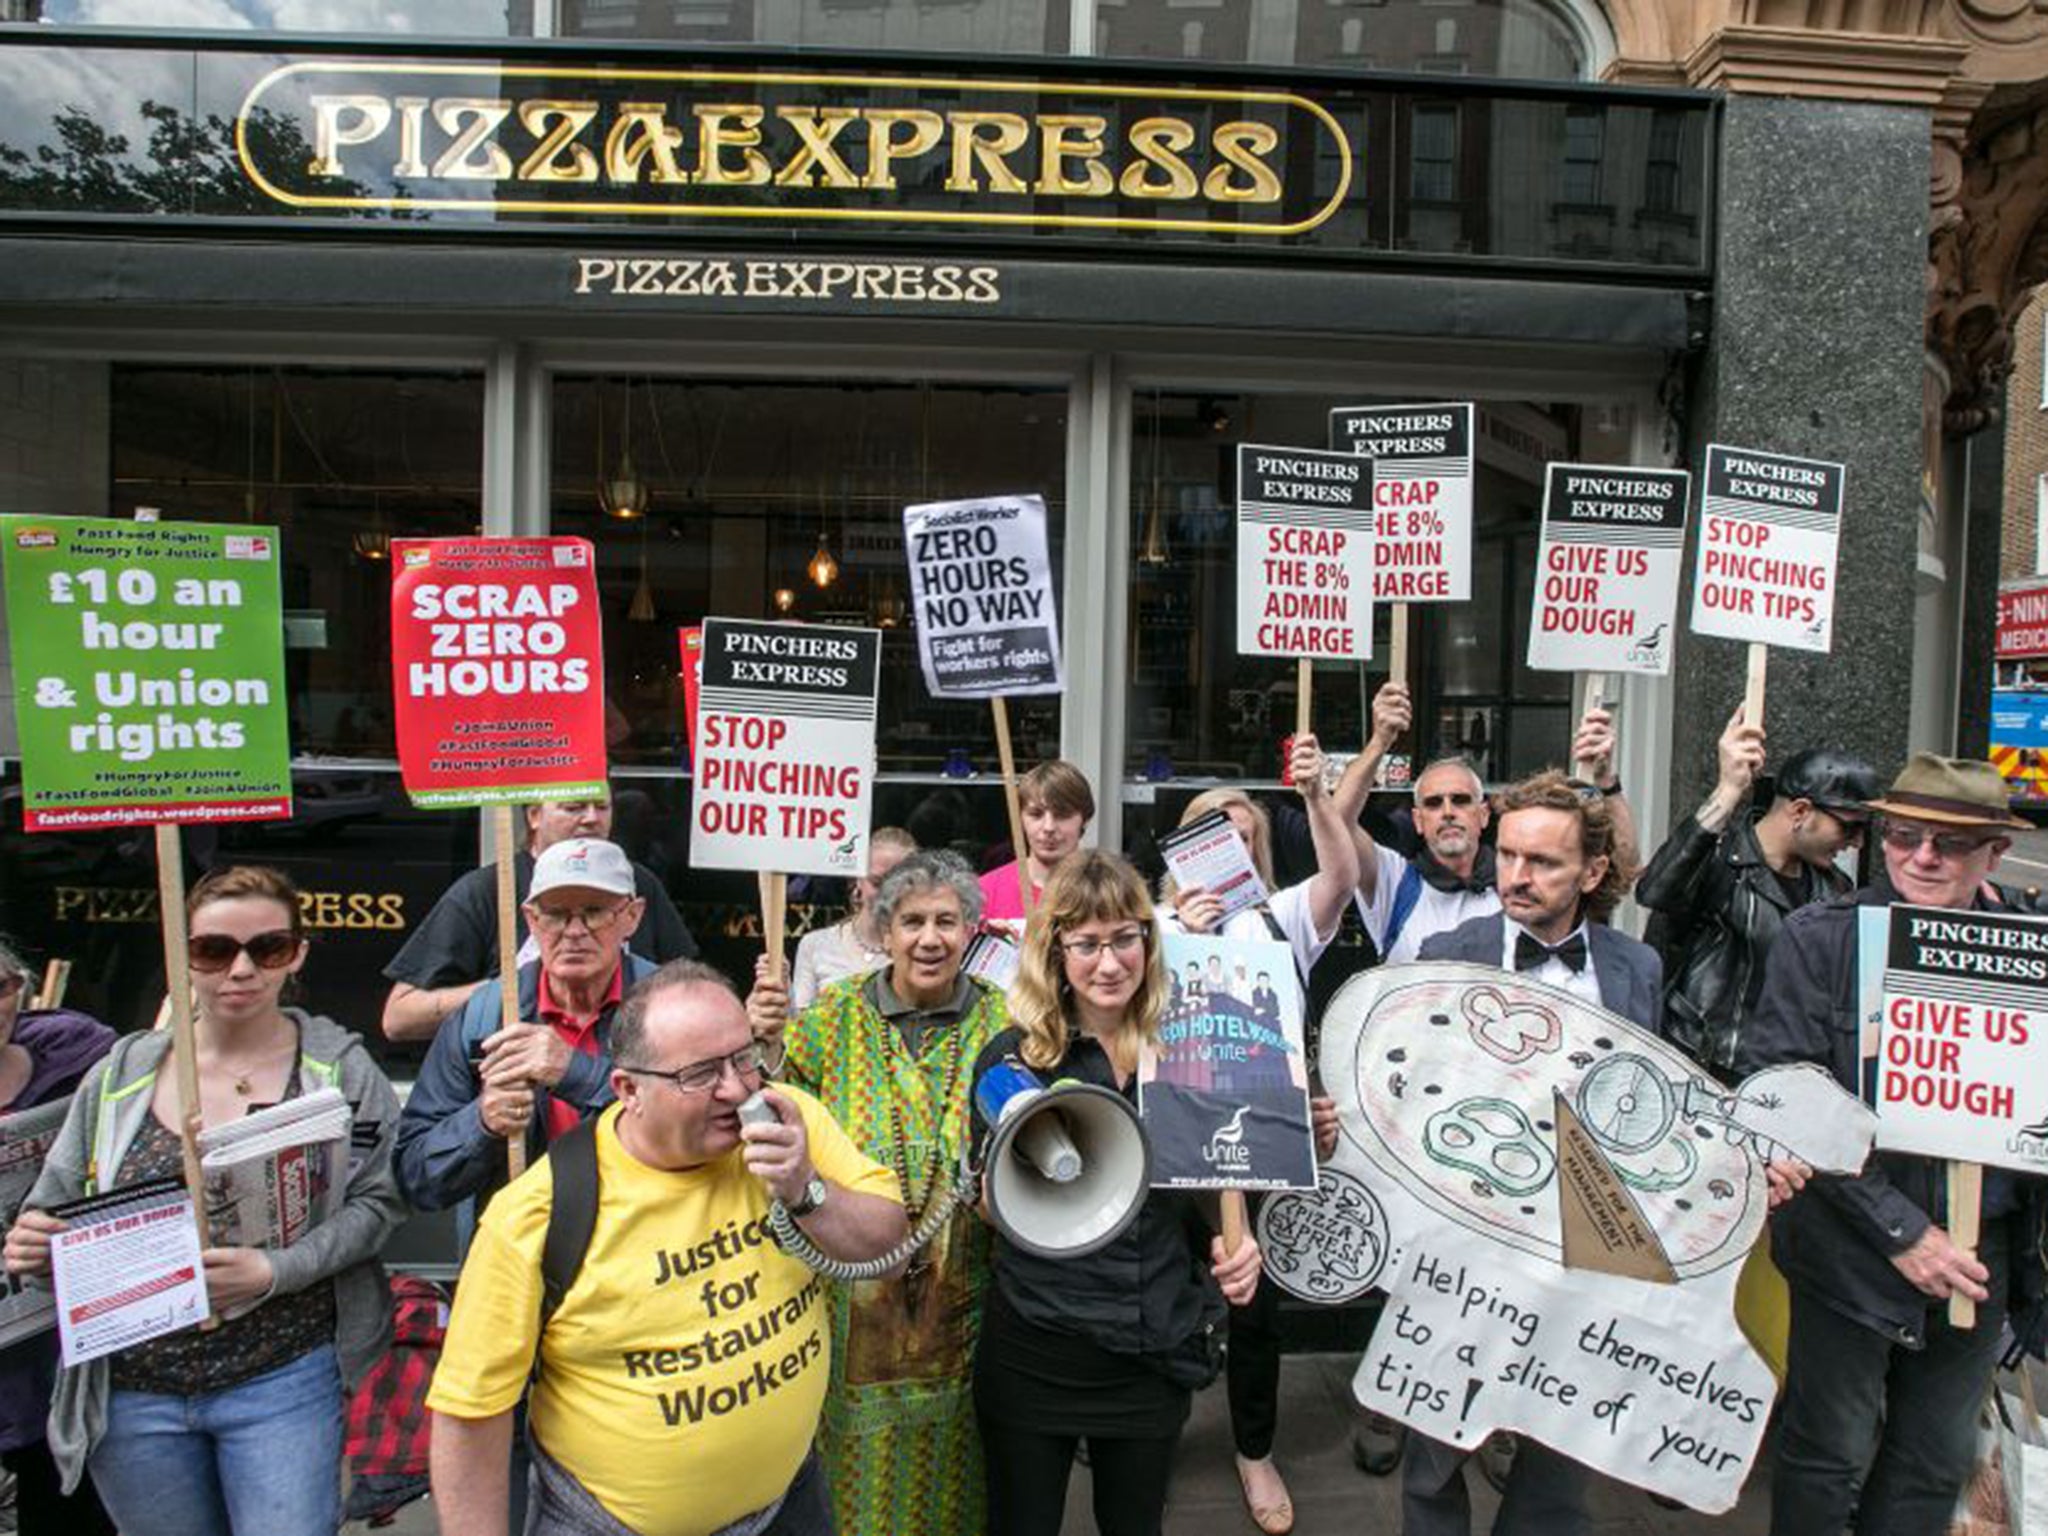 Support staff: Unite’s Dave Turnbull, speaking, leads restaurant workers in protest against ‘tip-skimming’ by Pizza Express, which then ended the practice (Mark Thomas)